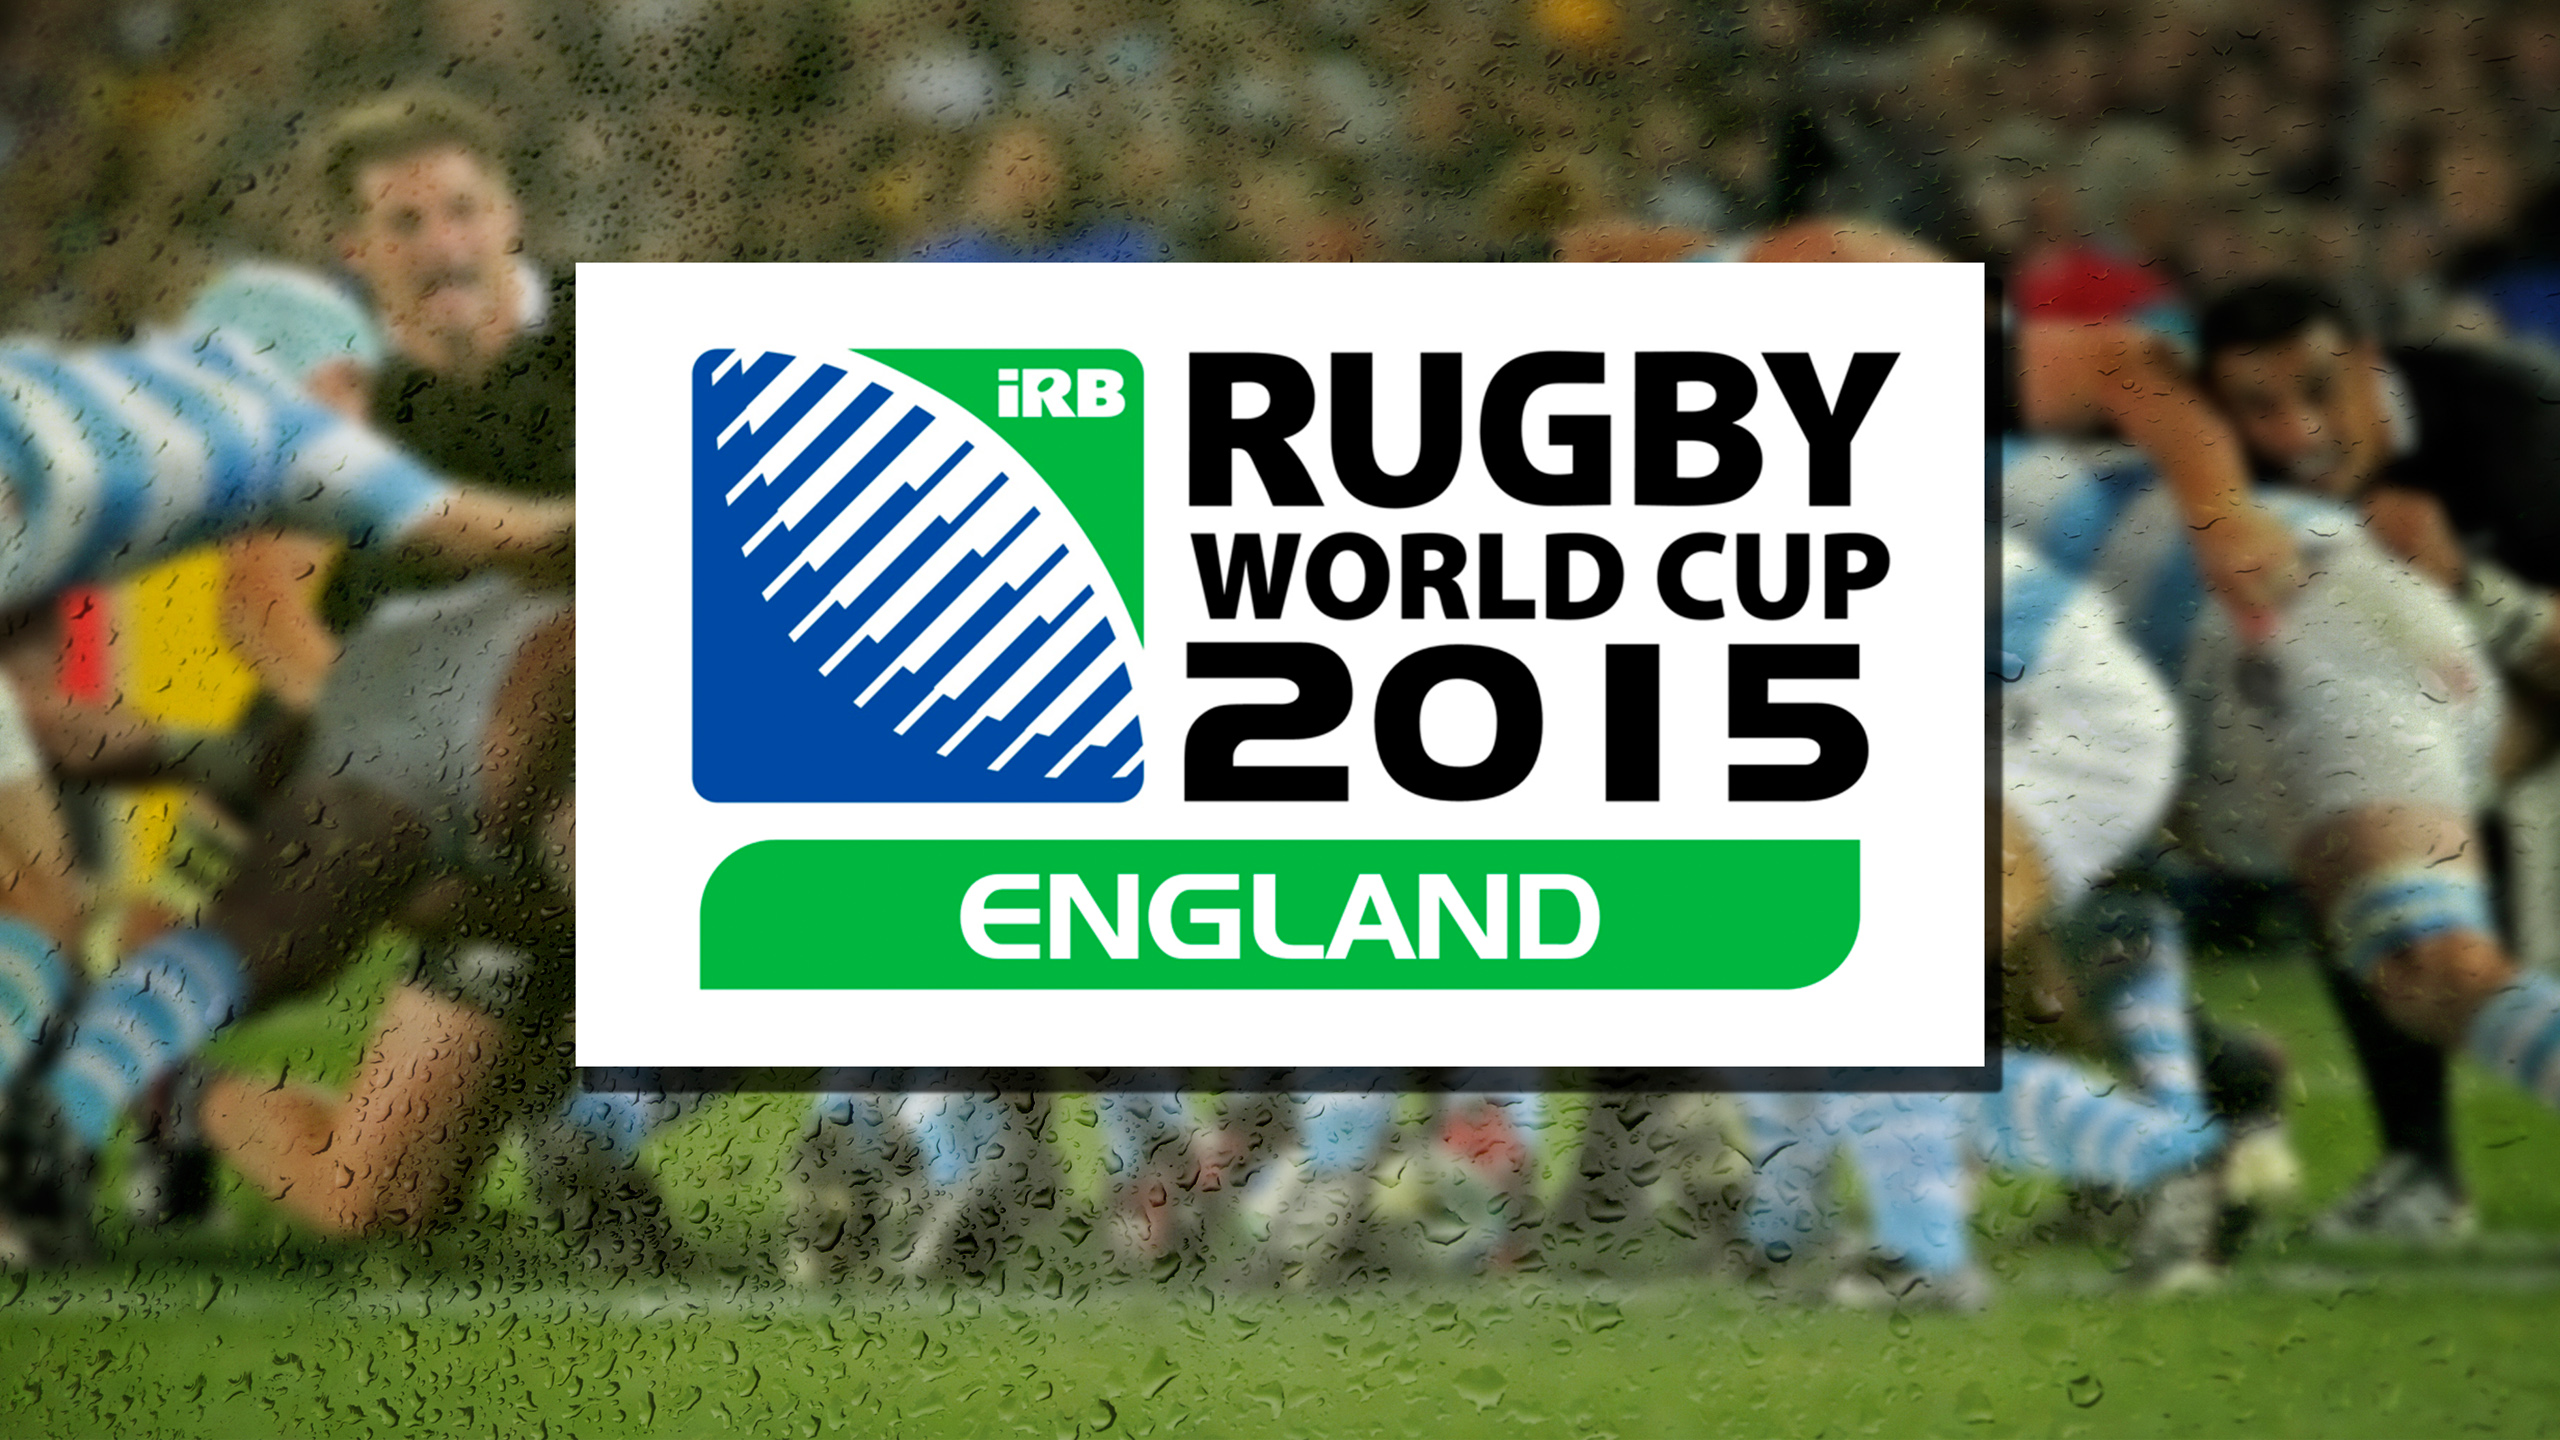 rugby, sports, rugby world cup 2015, england, rugby world cup